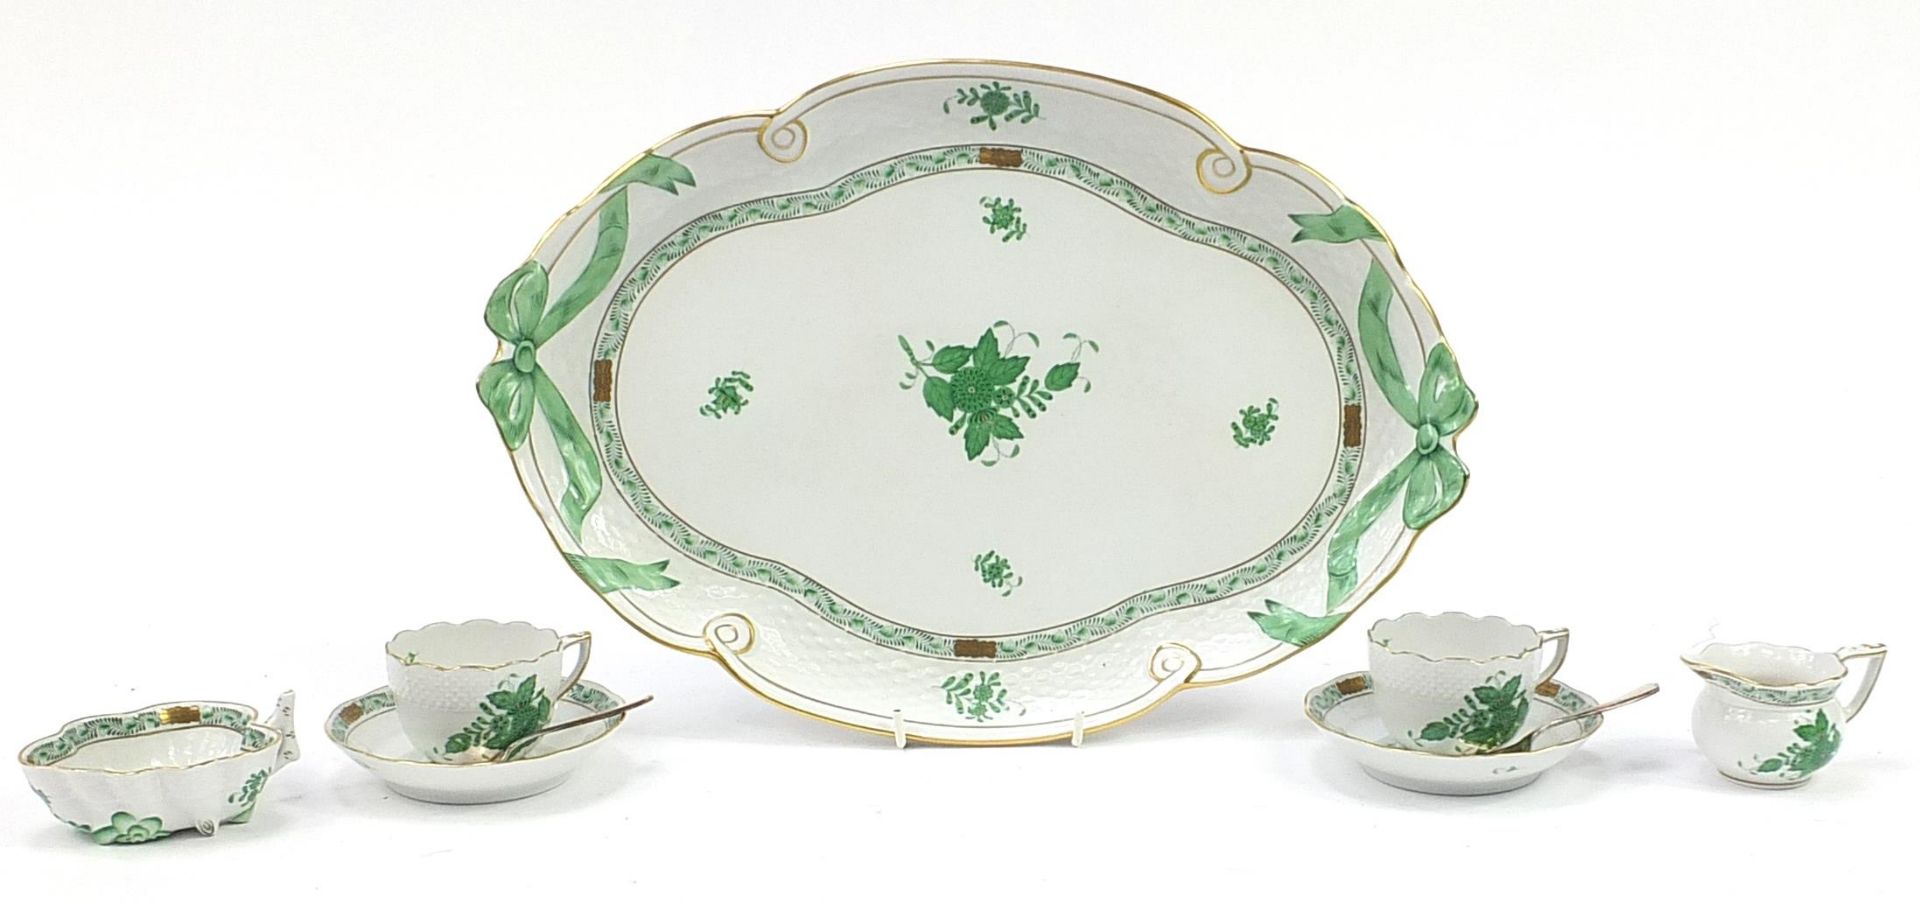 Herend of Hungary, porcelain tea for two part tea service on tray hand painted in the Chinese